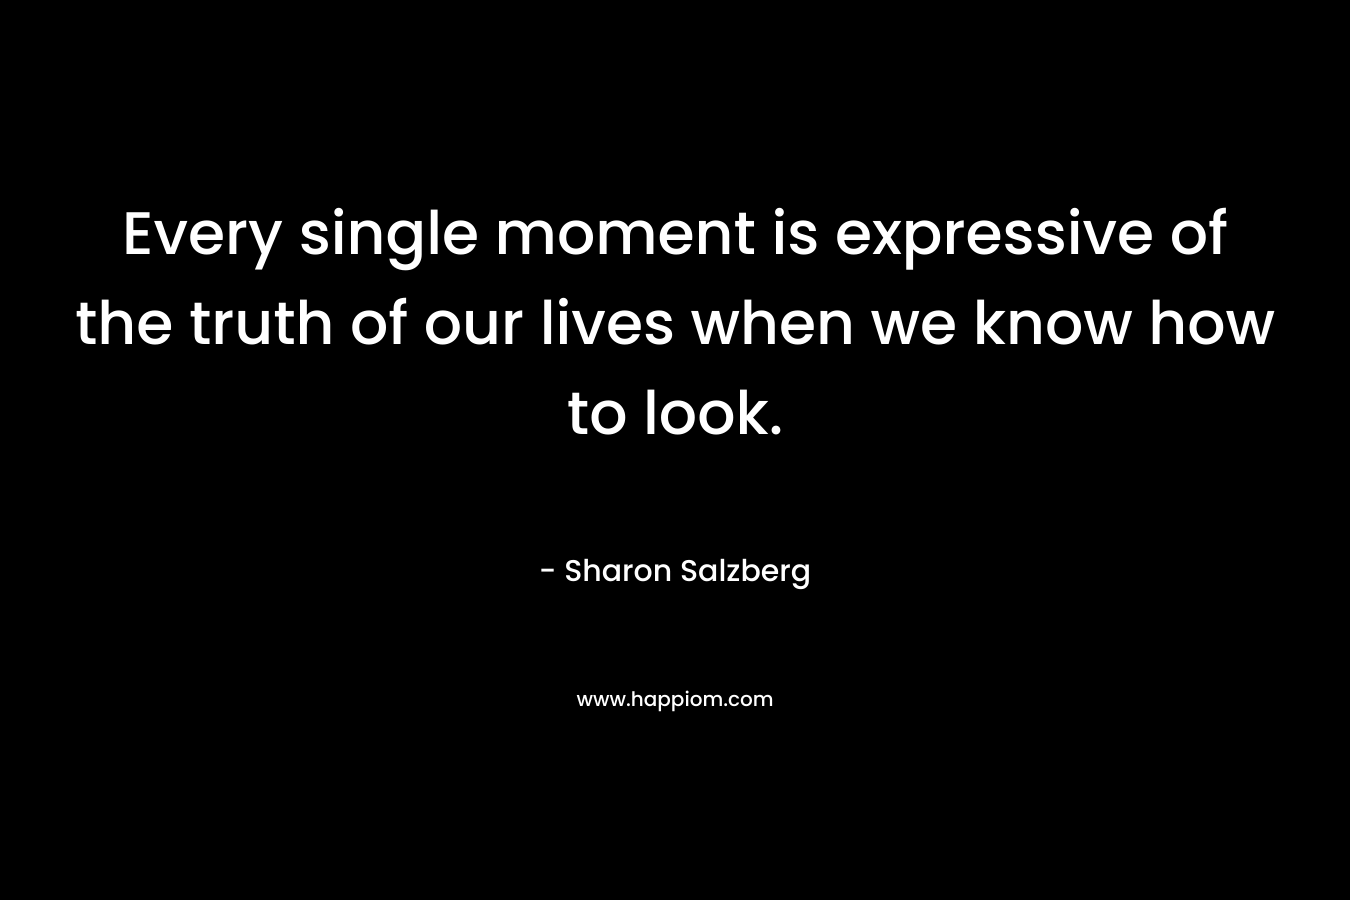 Every single moment is expressive of the truth of our lives when we know how to look.